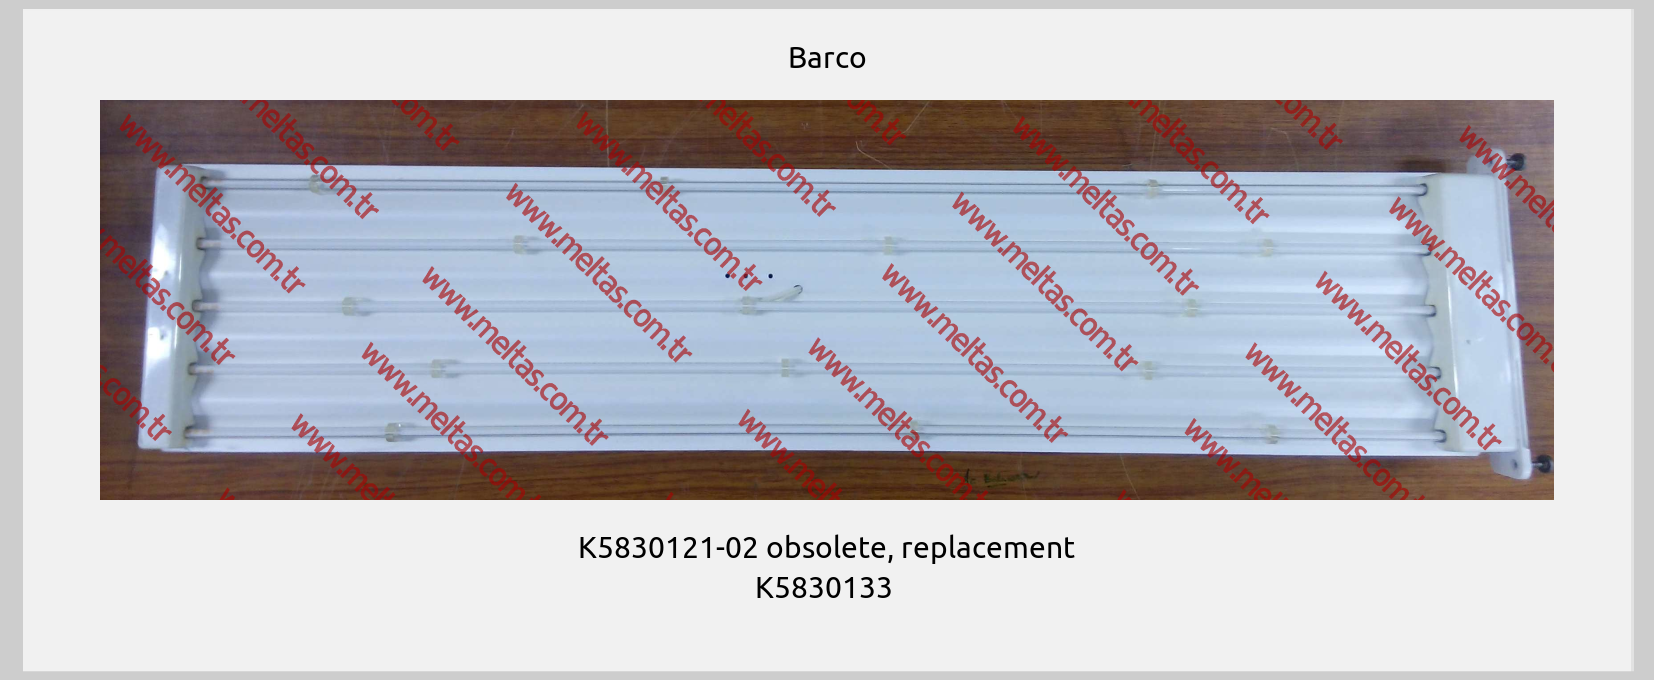 Barco - K5830121-02 obsolete, replacement K5830133 